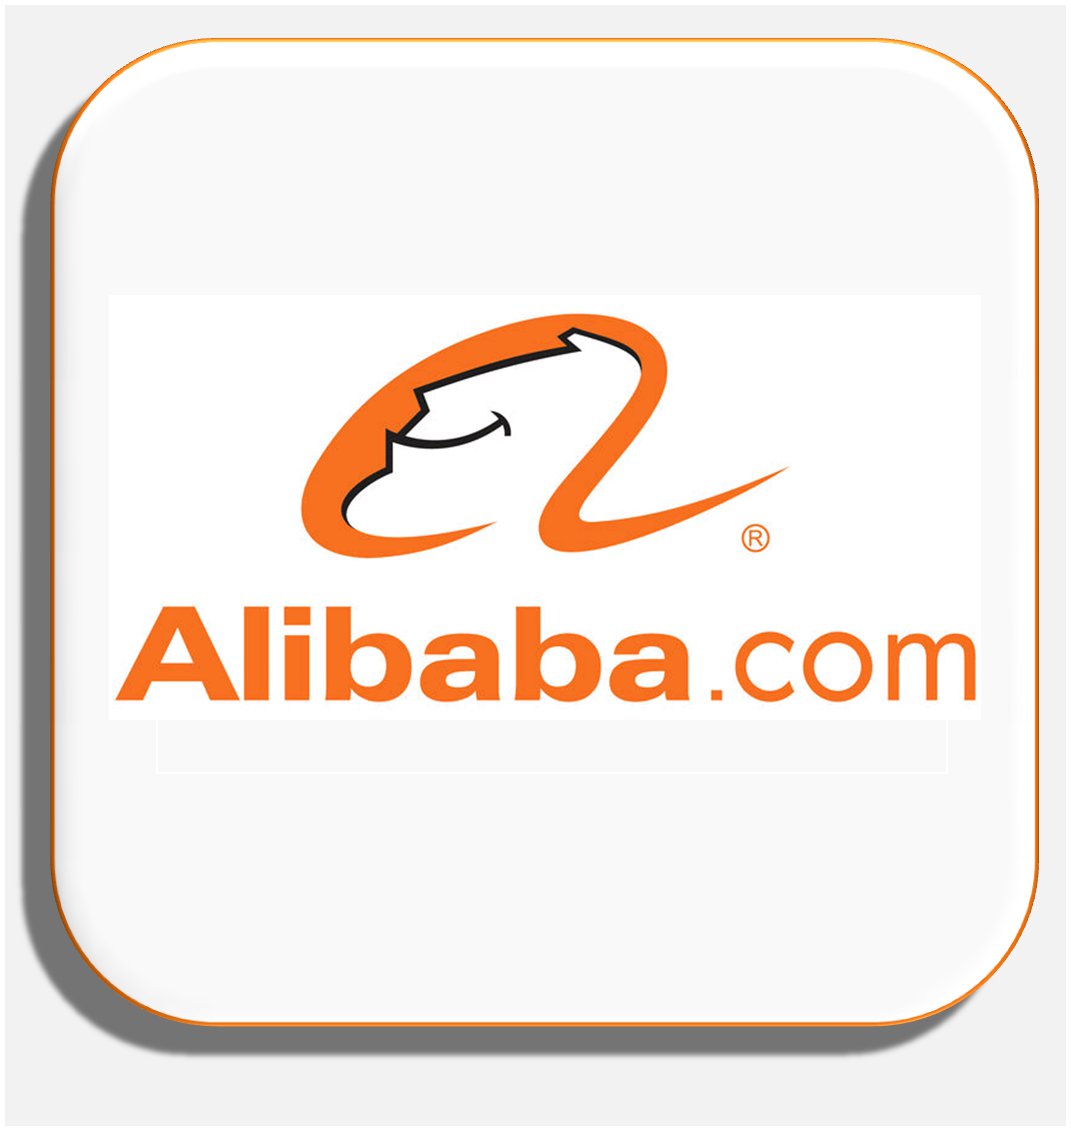 Image result for ALIBABA.COM